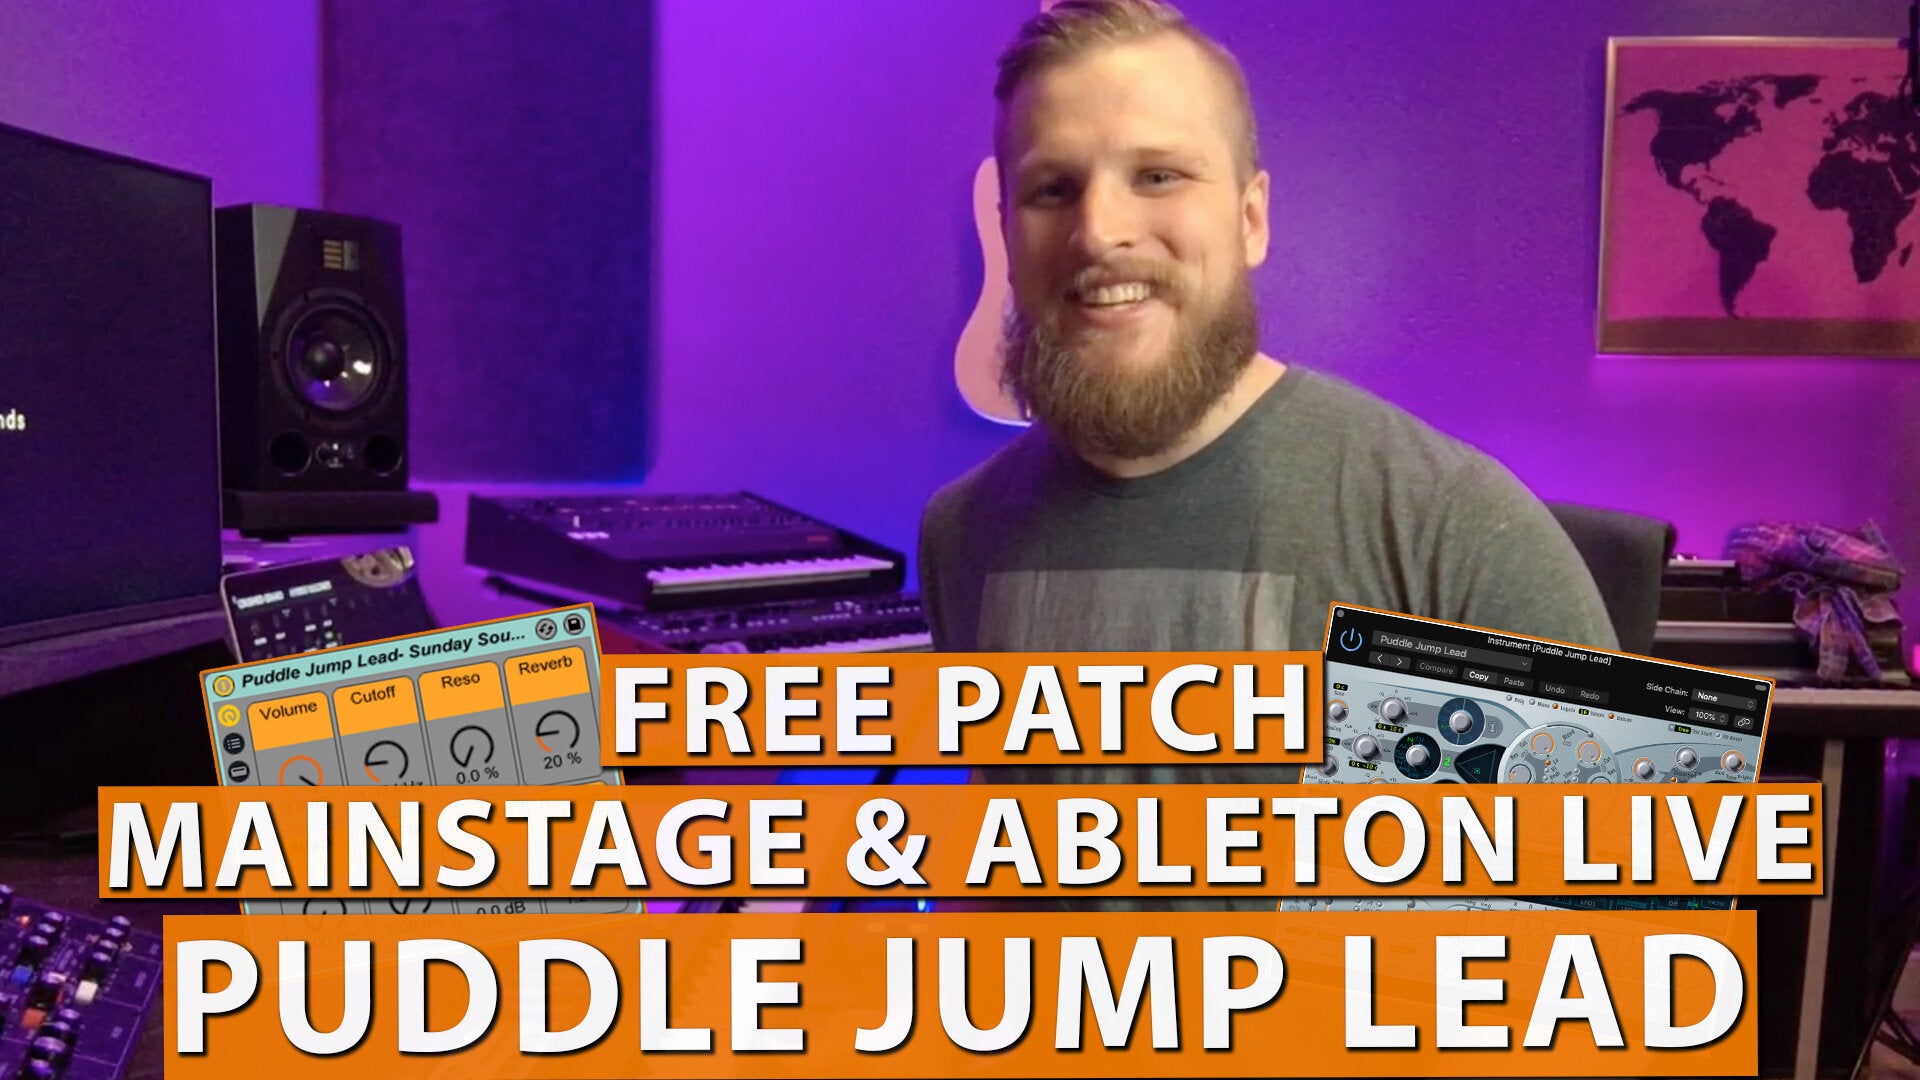 Free MainStage & Ableton Worship Patch! - Puddle Jump Lead